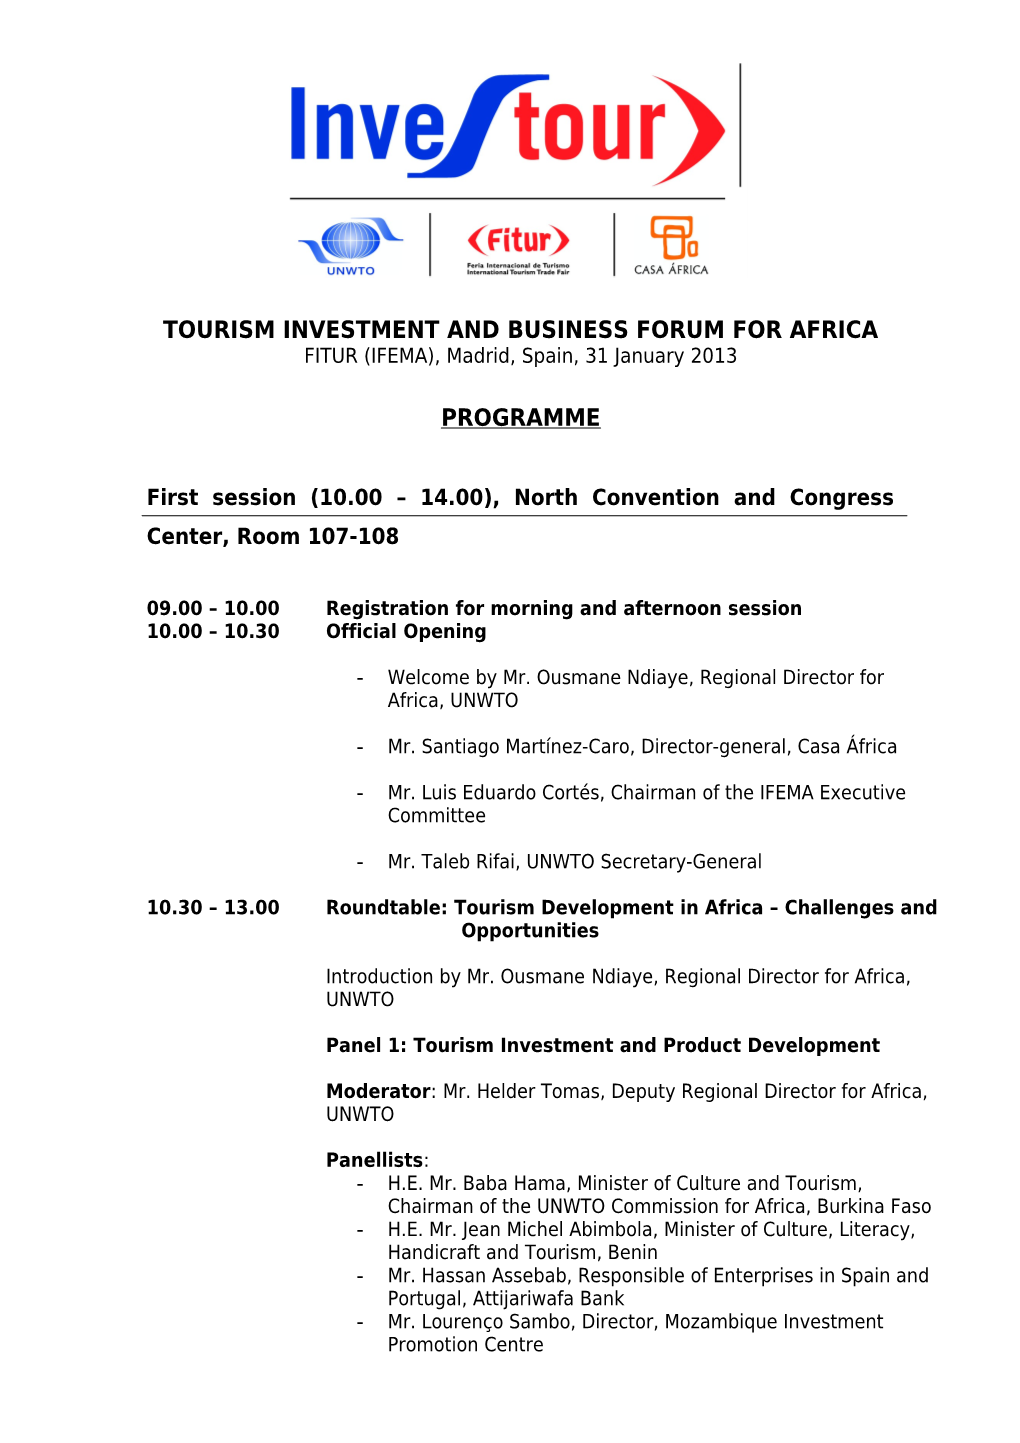 Tourism Investment and Business Forum for Africa